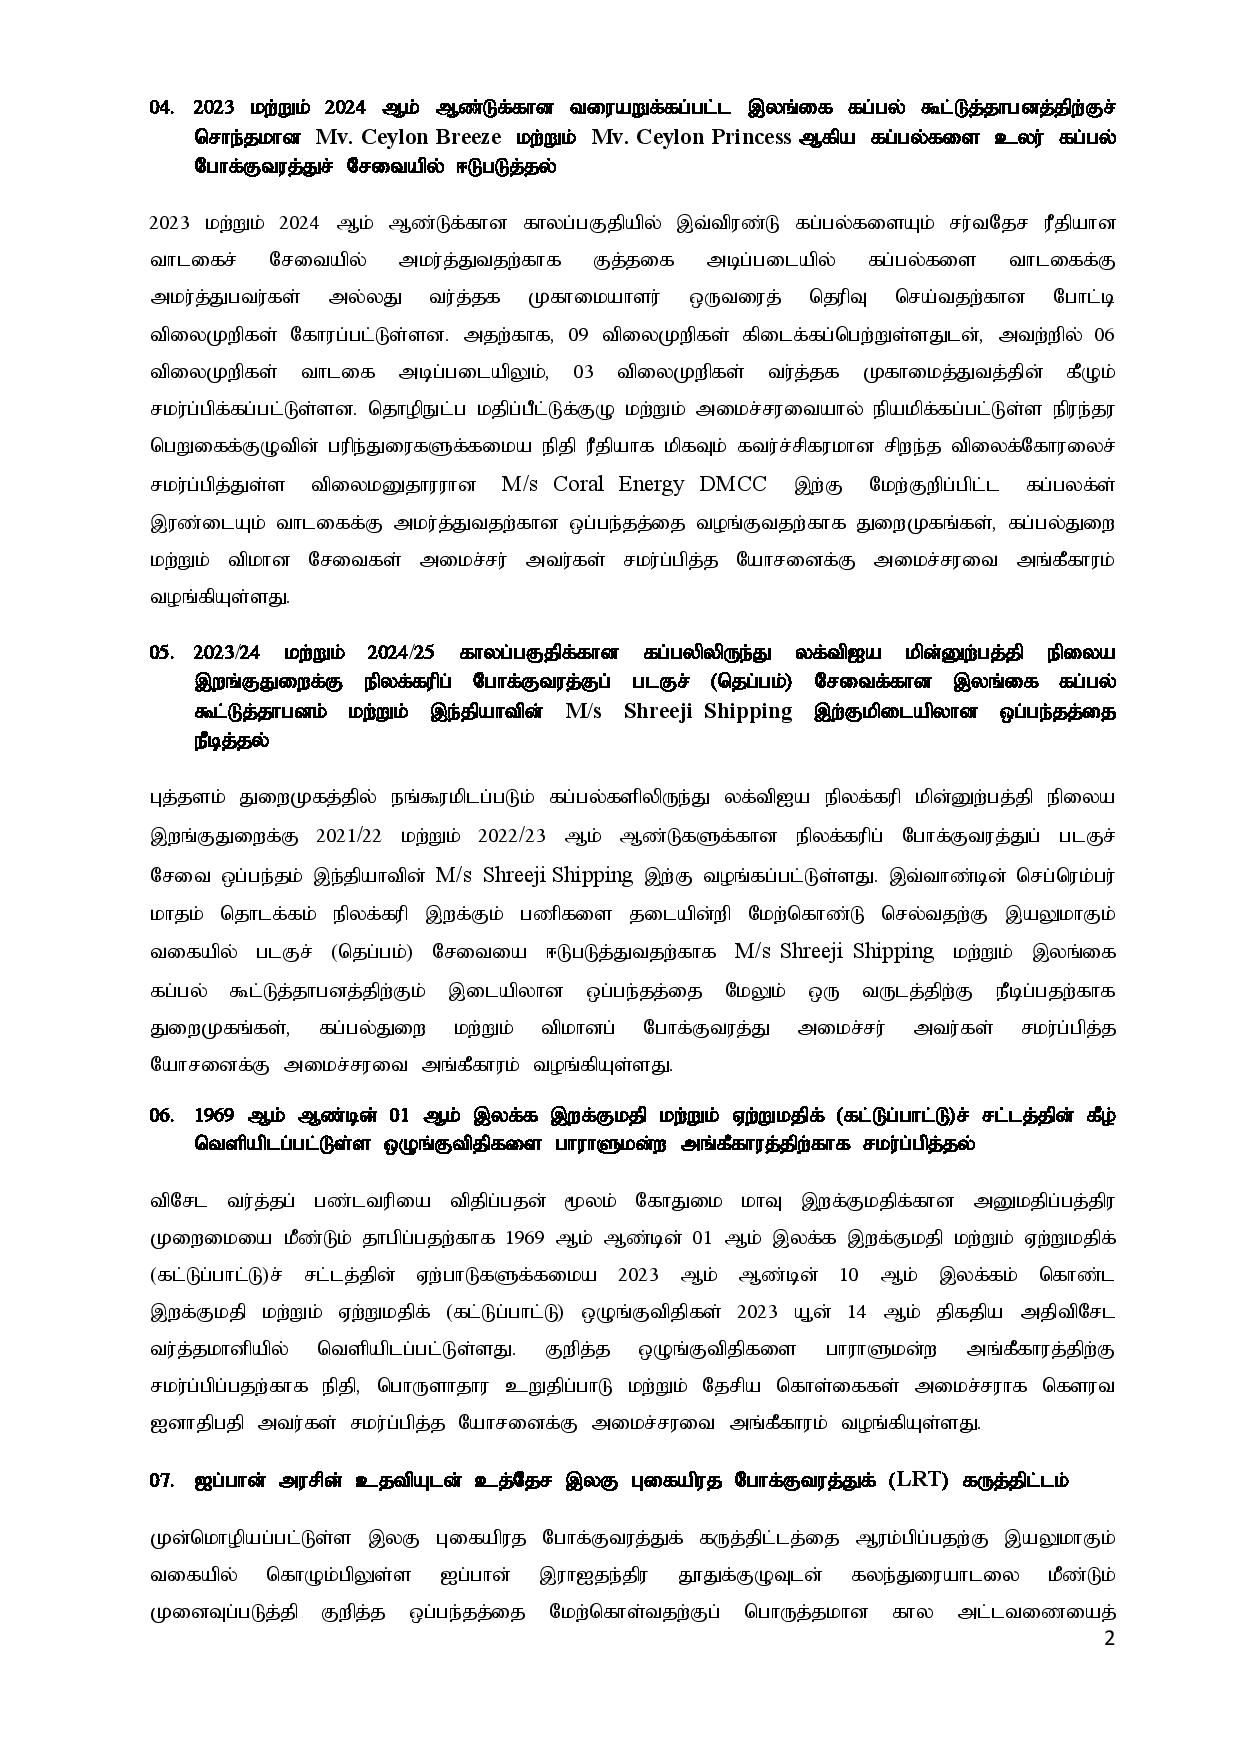 Cabinet Decisions on 04.07.2023 Tamil page 002